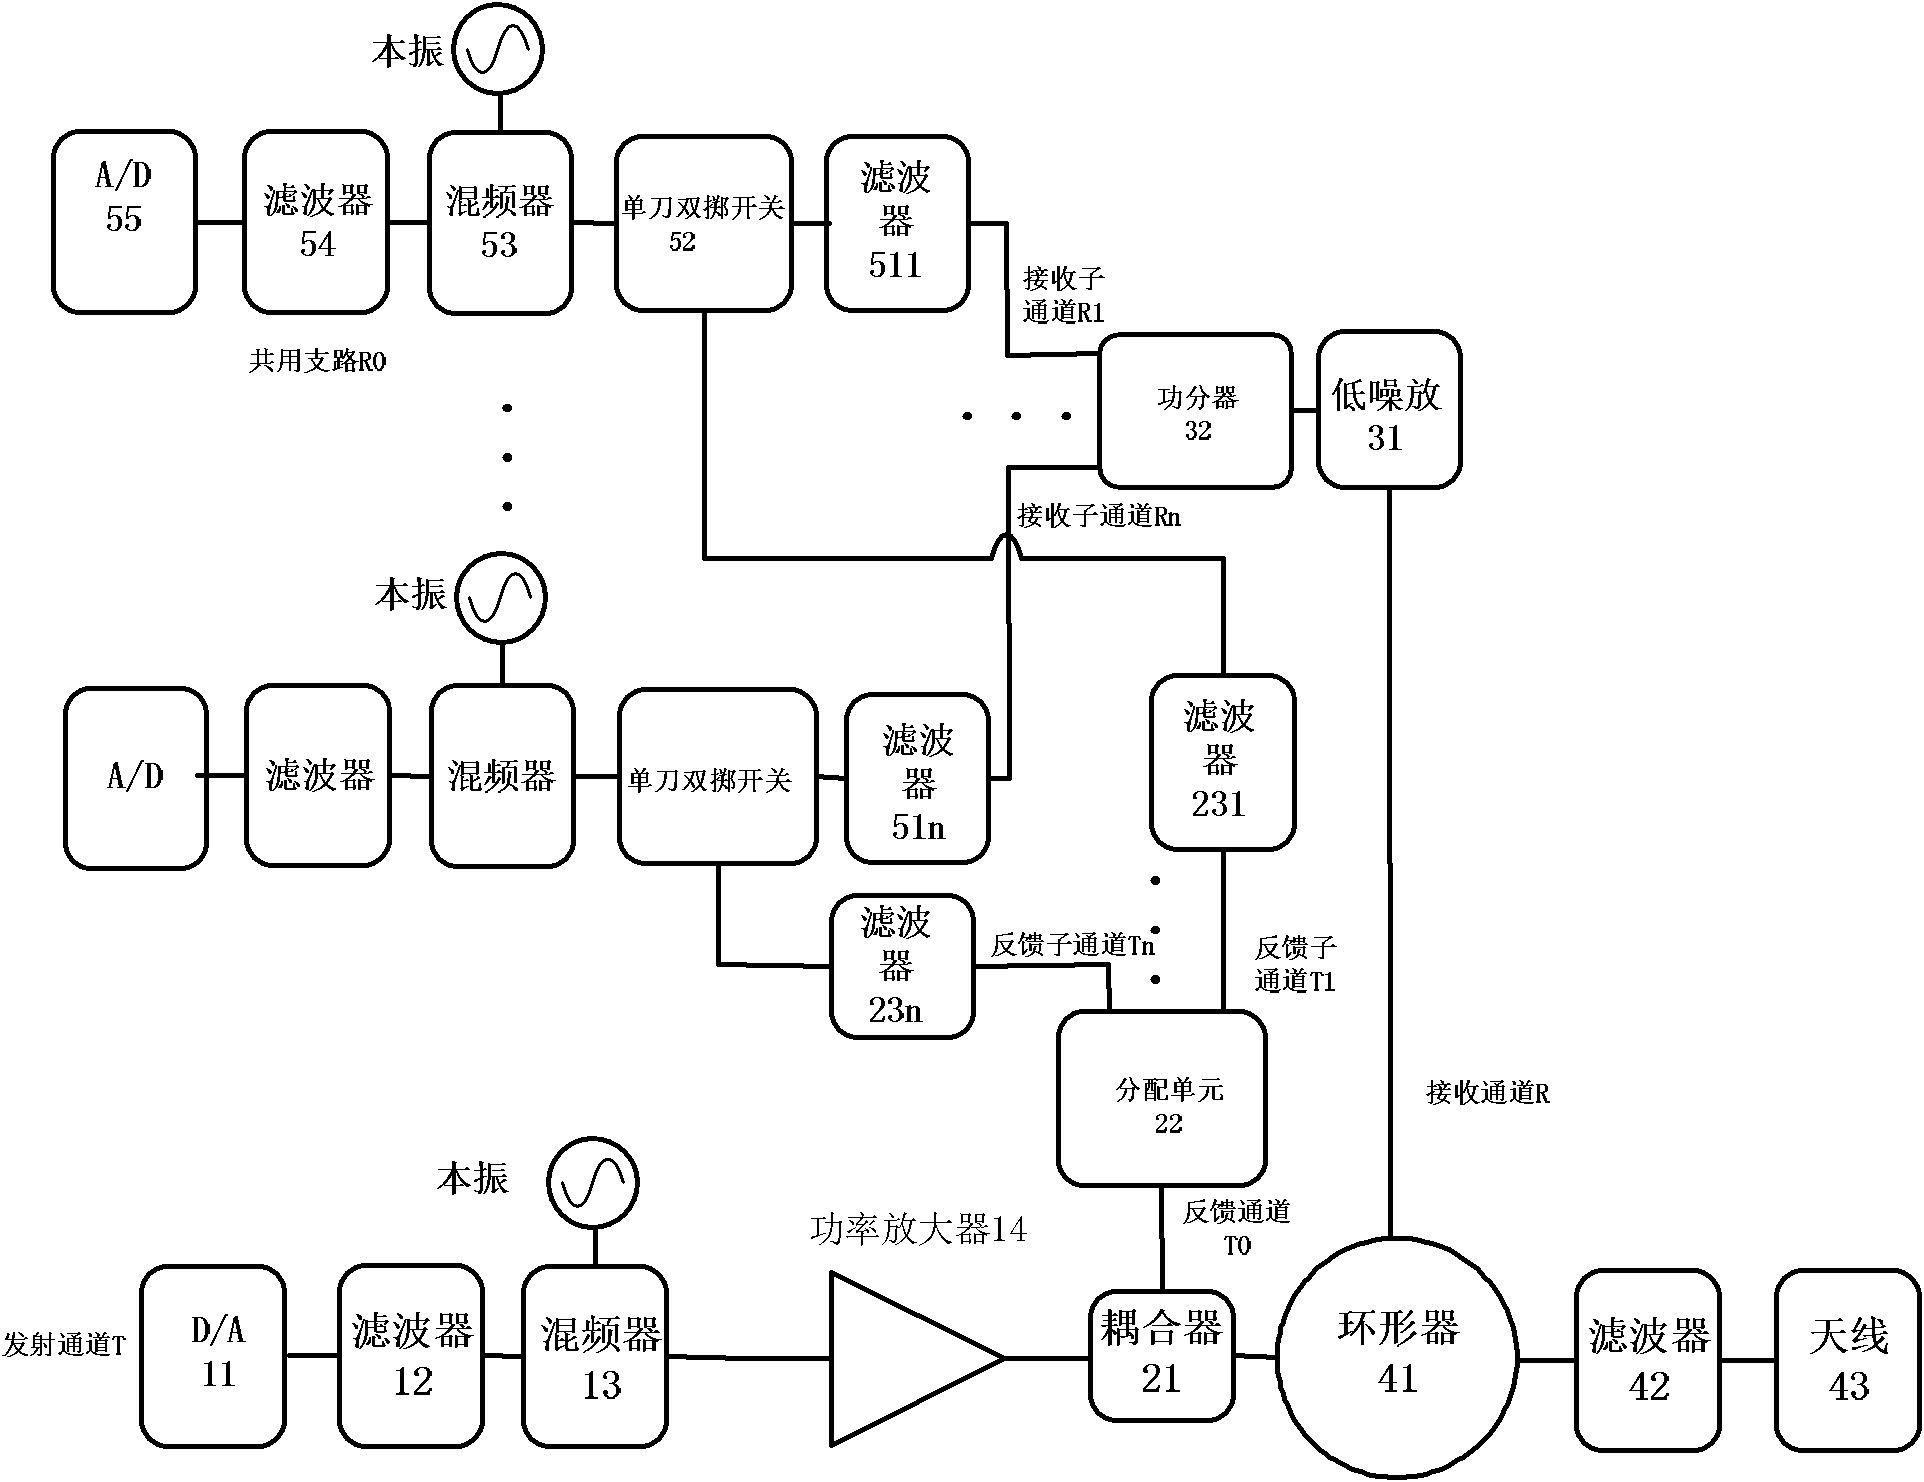 TDD (time division duplex) radio-frequency receiving/emission circuit for discrete baseband signals